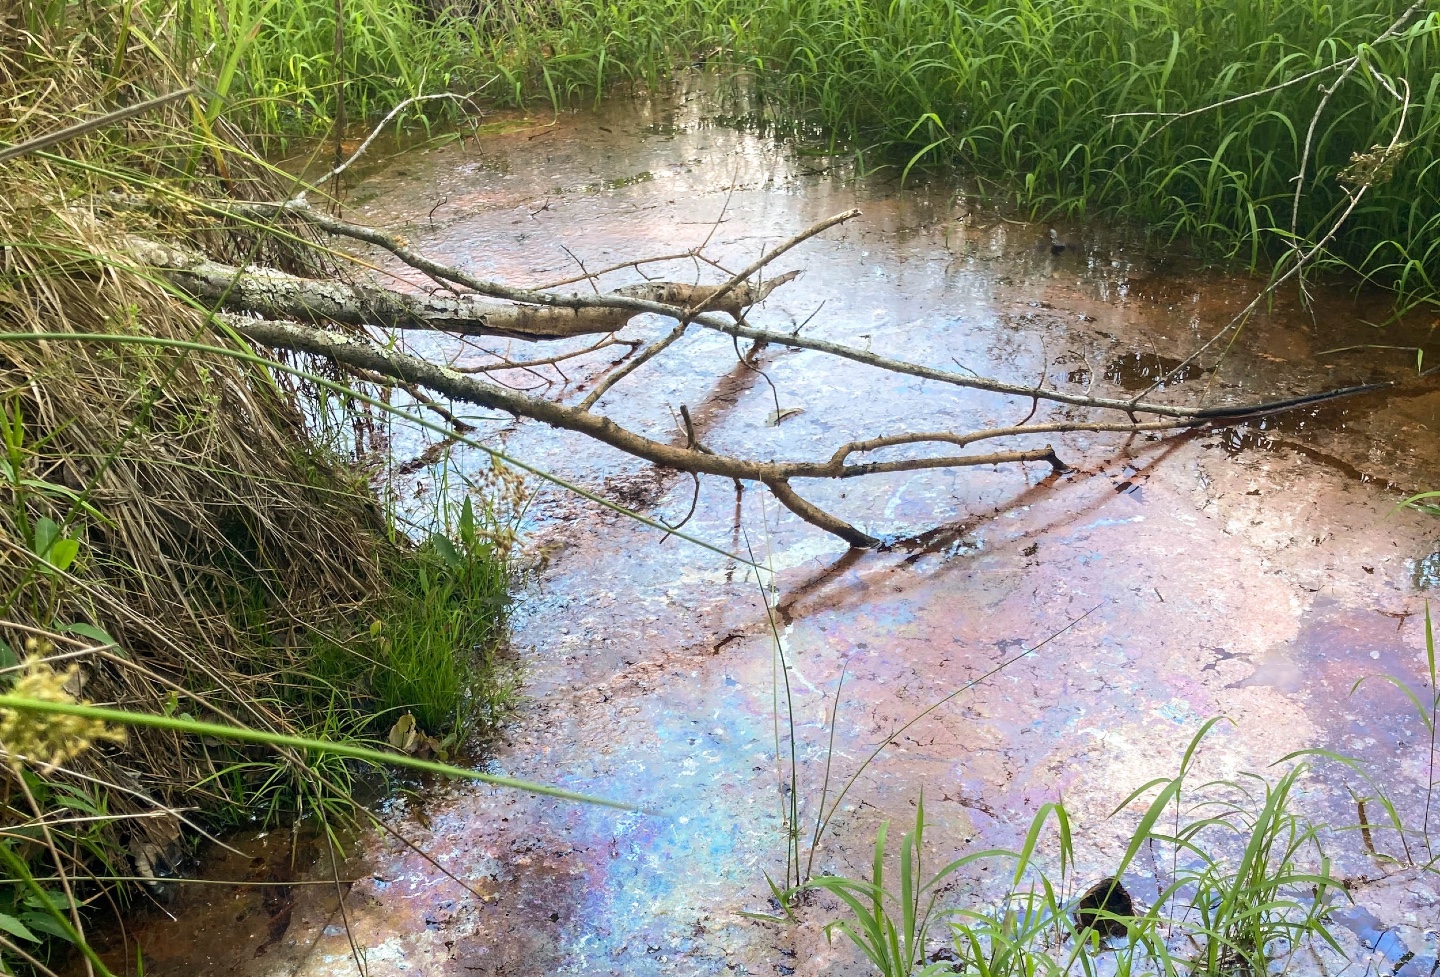 The funding pool is sourced from the Kinder Morgan pipeline spill in Anderson County in 2014, shown here. (Photo/Provided)